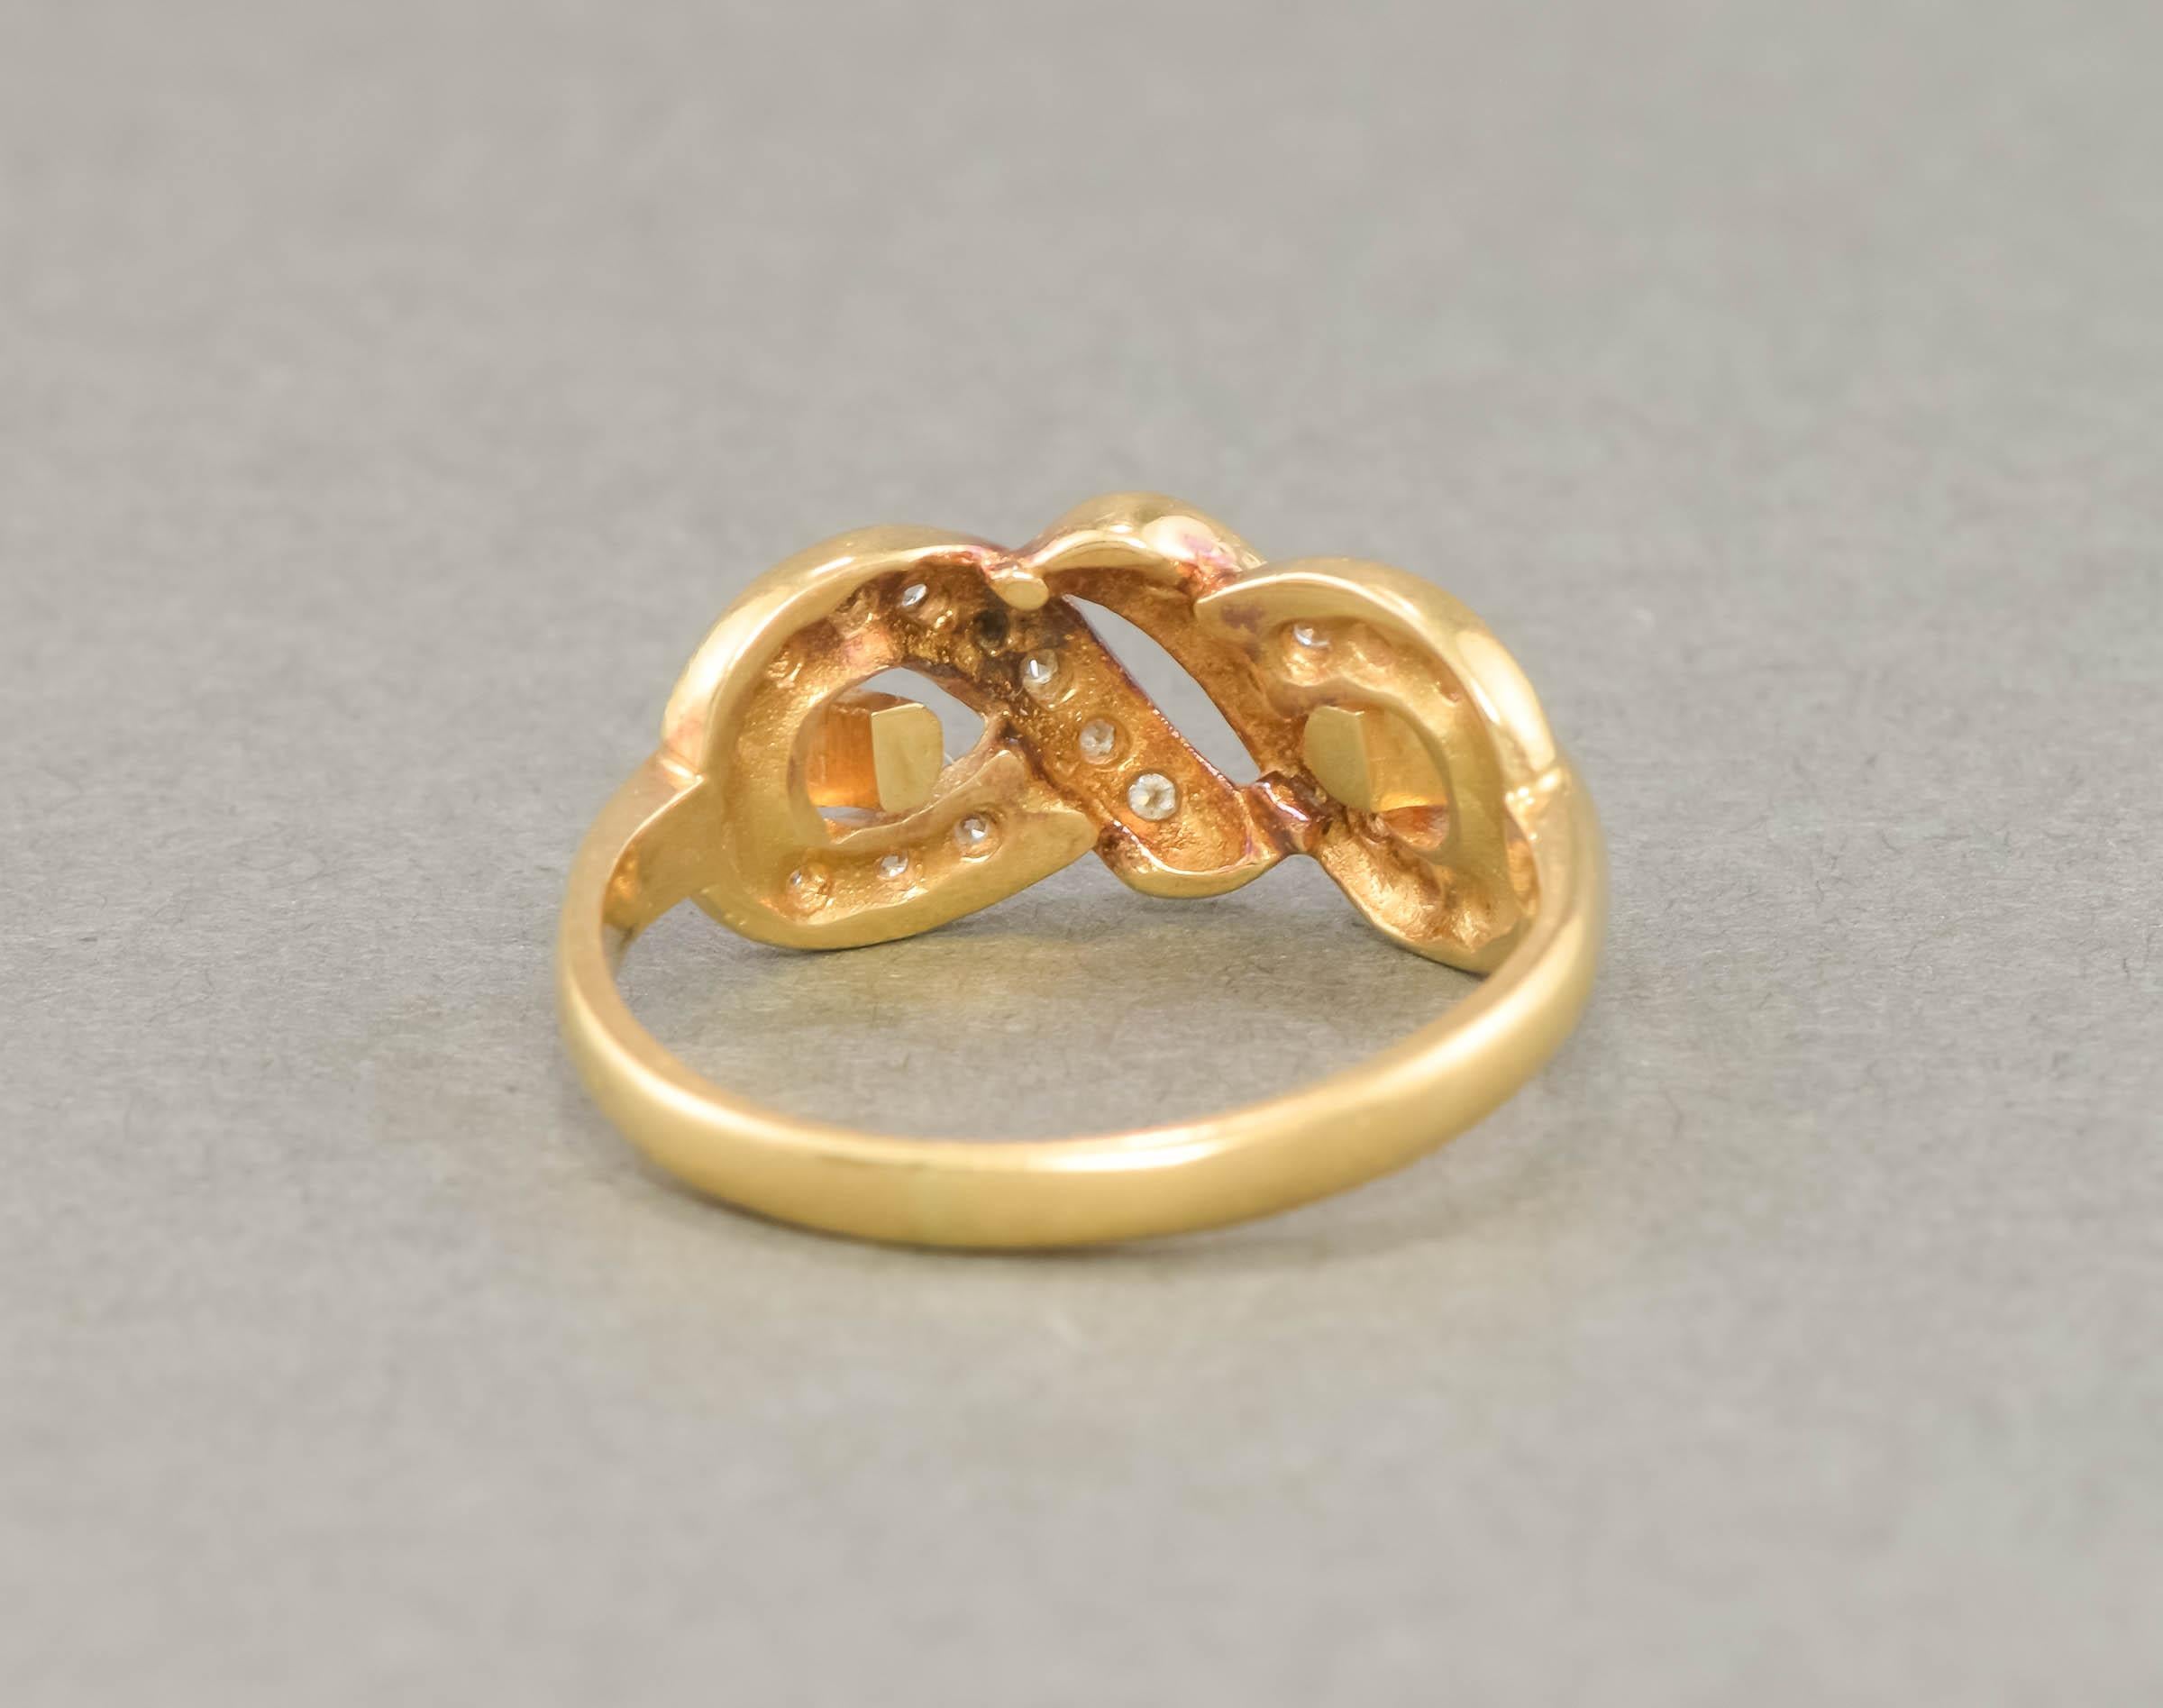 Vintage 18K Gold Diamond Infinity Love Knot Ring, Hallmarked 1985 In Good Condition For Sale In Danvers, MA